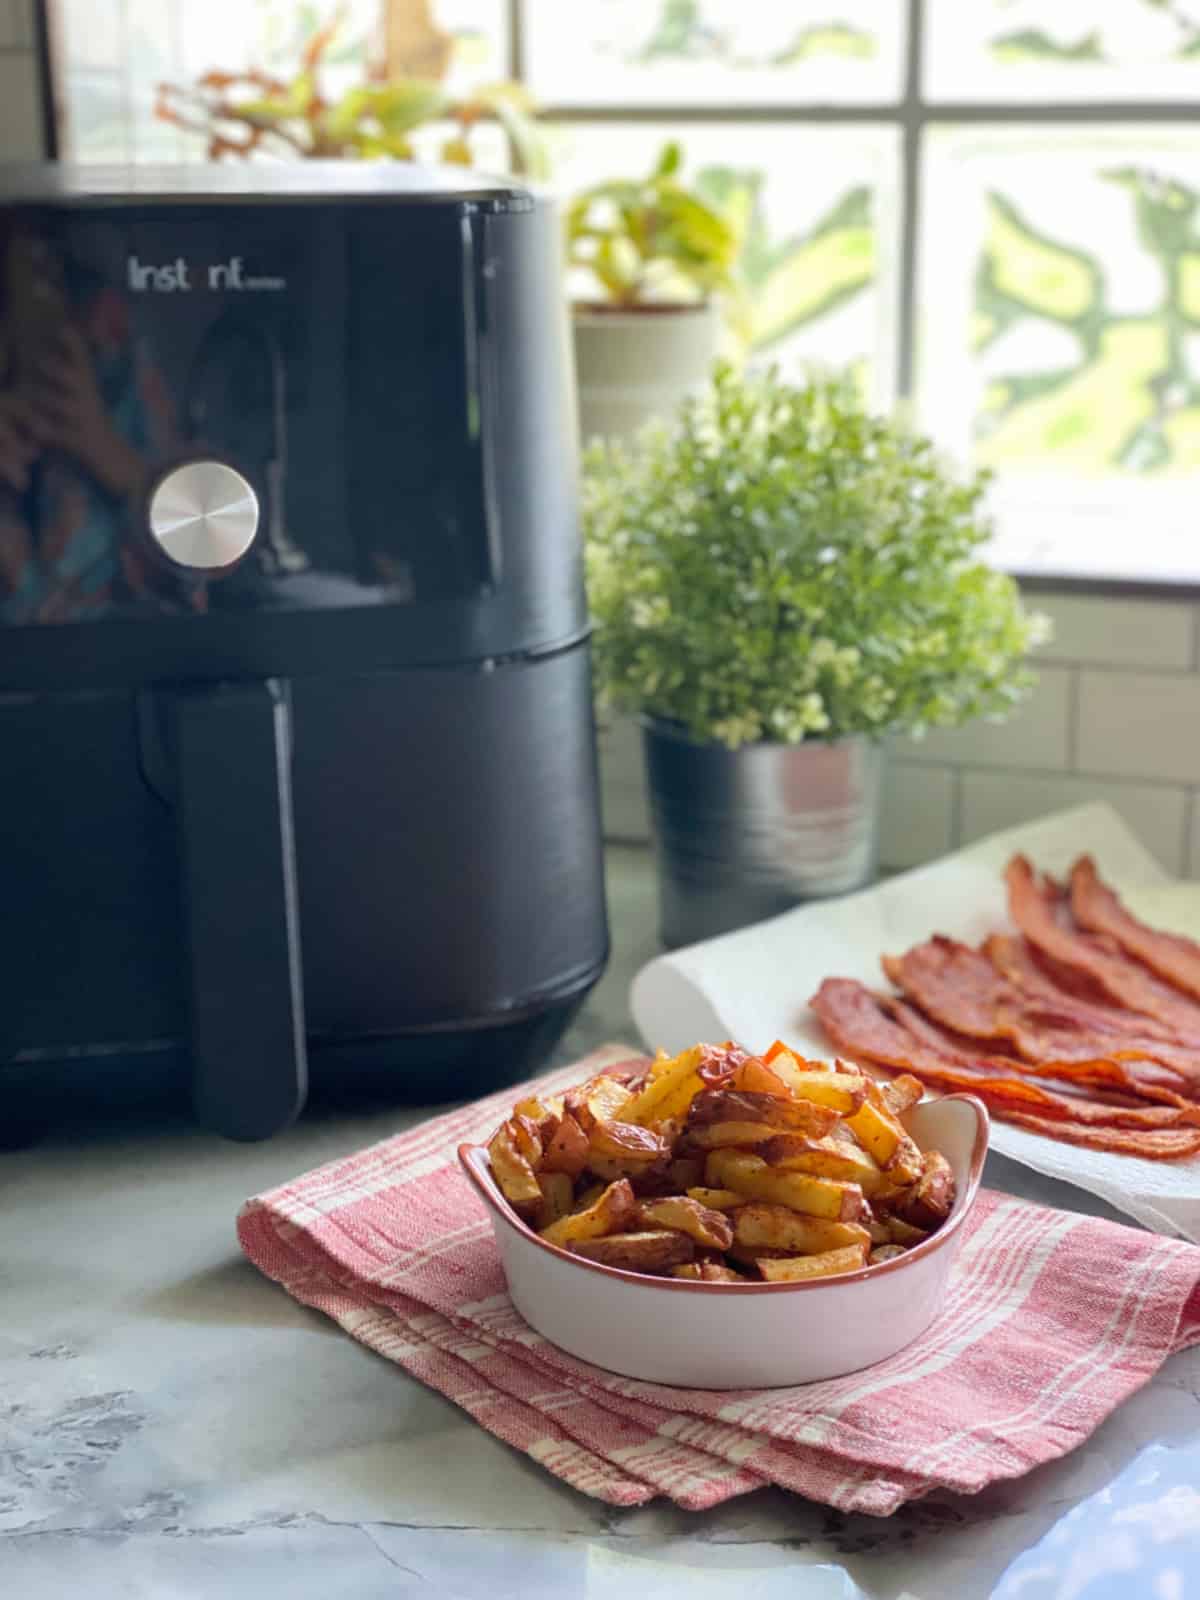 Fried potatoes in white dish with air fryer and cooked bacon in the background